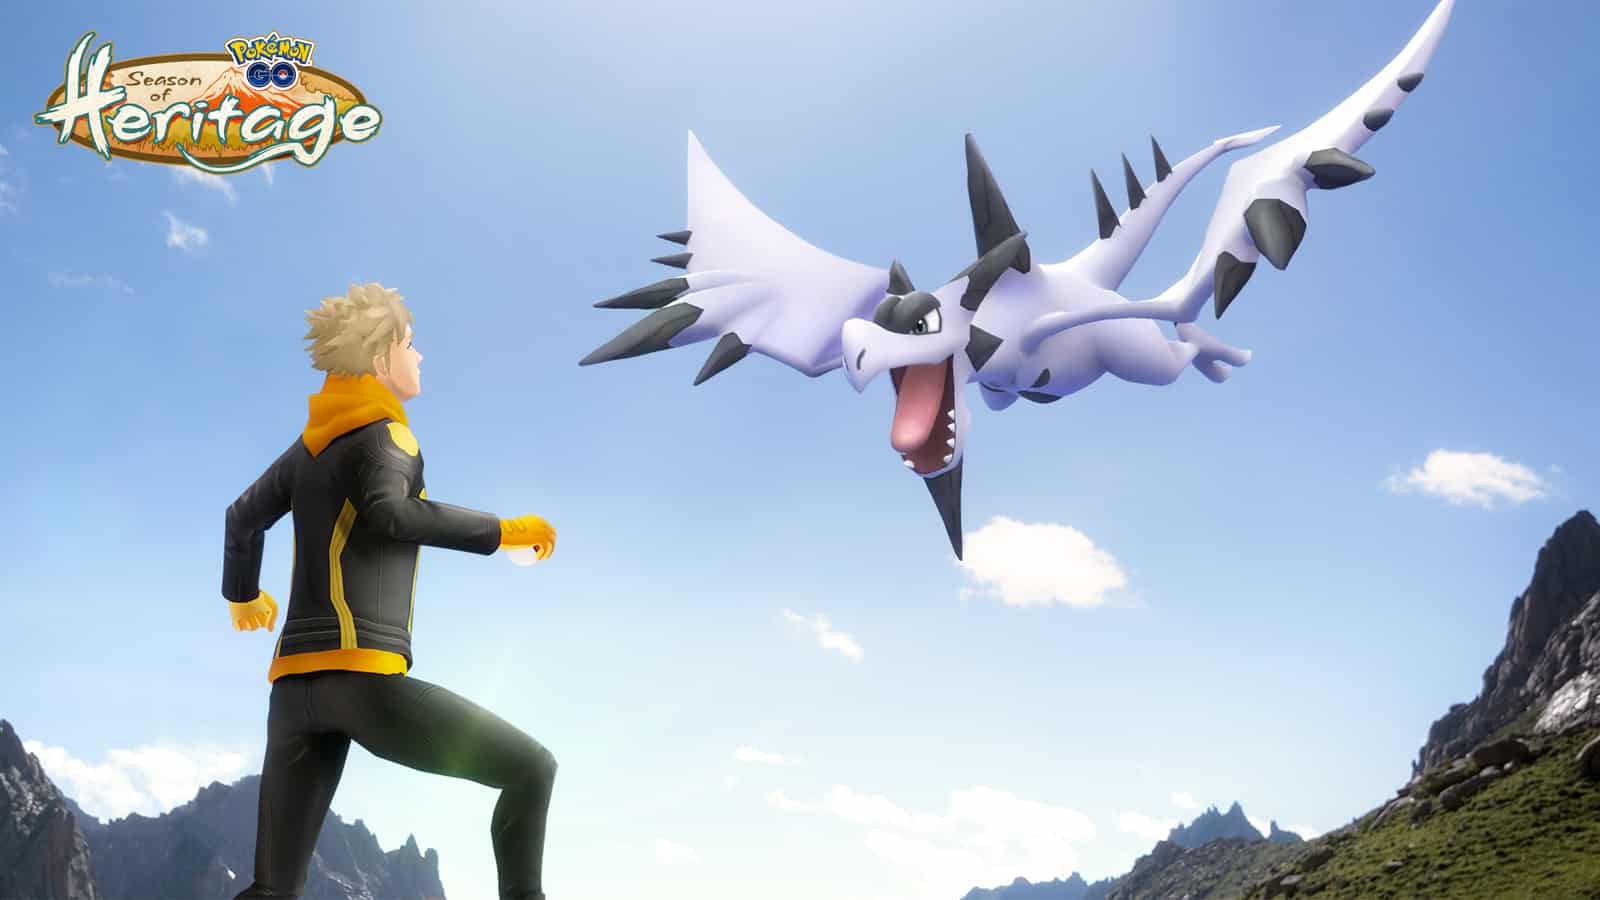 A poster for the Mountains of Power event in Pokemon Go